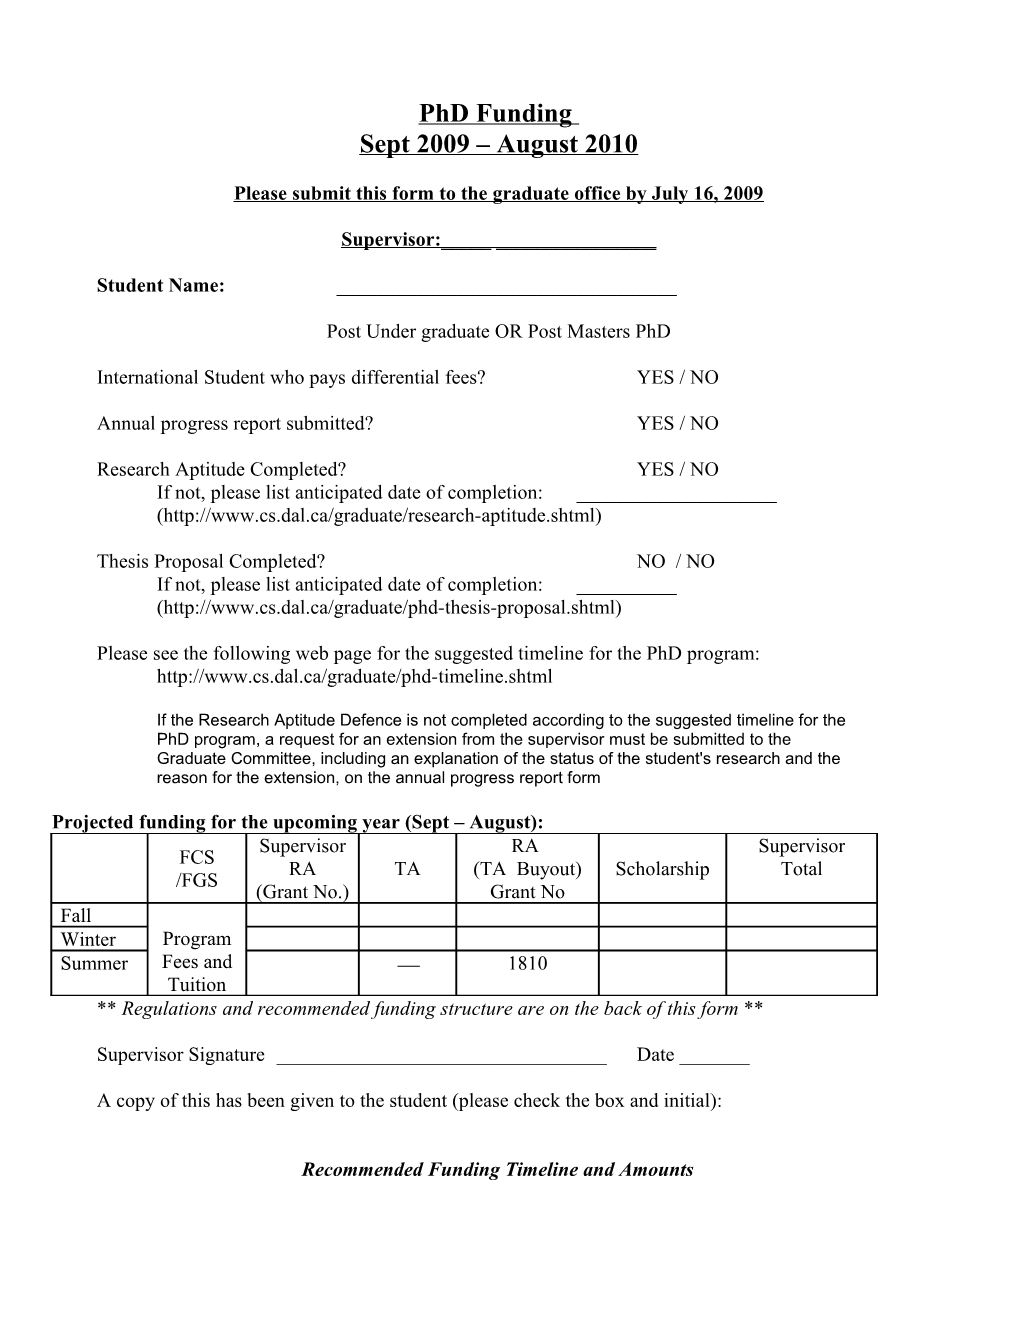 Please Submit This Form to the Graduate Office by July 16, 2009